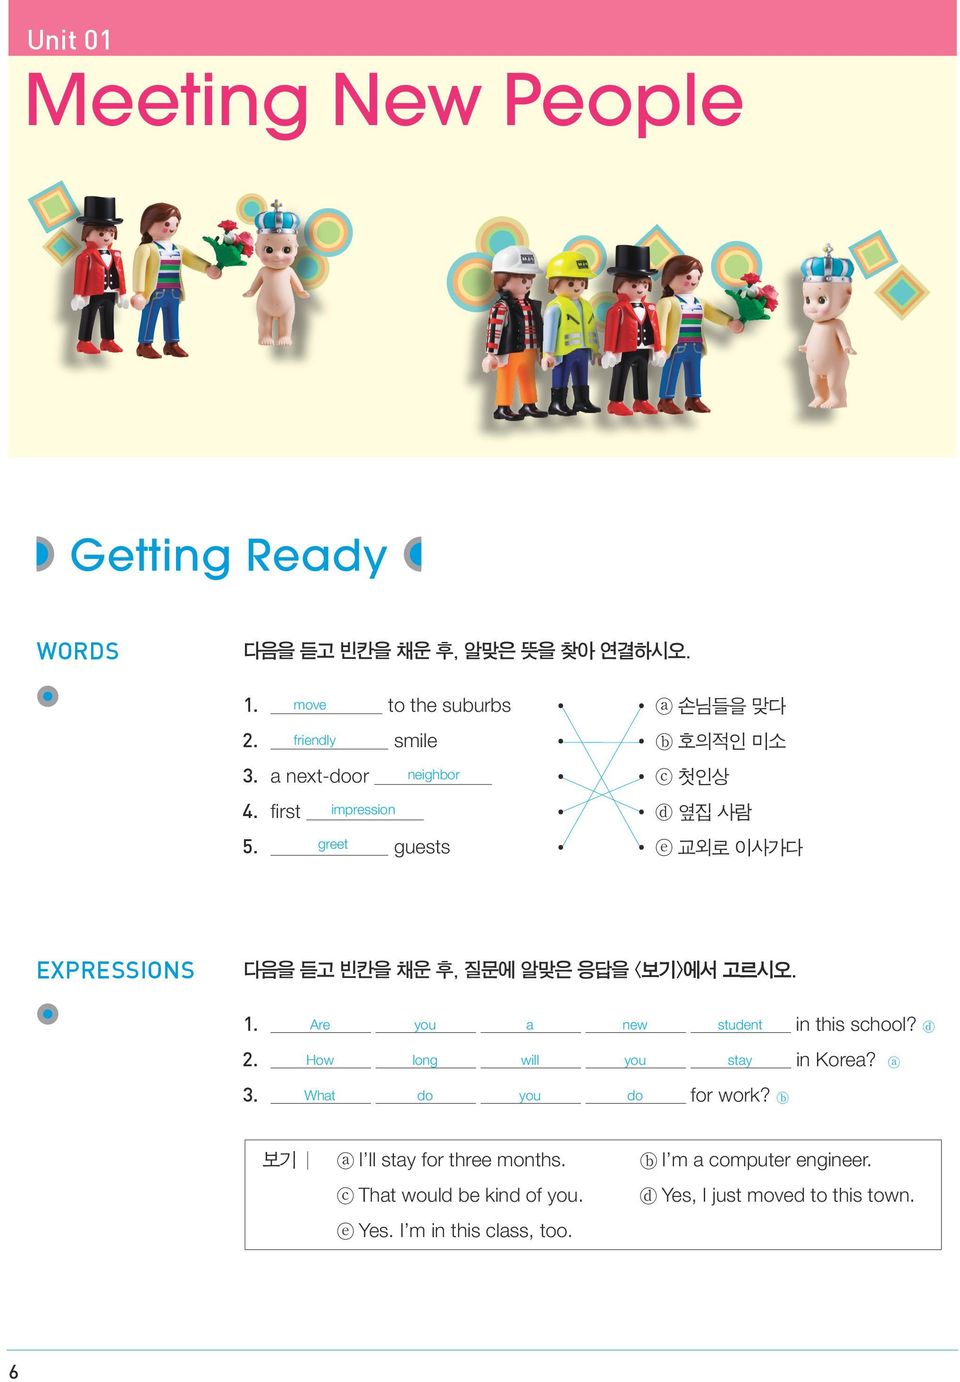 greet guests e 교외로 이사가다 EXPRESSIONS 다음을 듣고 빈칸을 채운 후, 질문에 알맞은 응답을 < 기 에 보기>에 고 시오. 고르시오. 고 시오. 1. Are you a new student in this school? d 2.